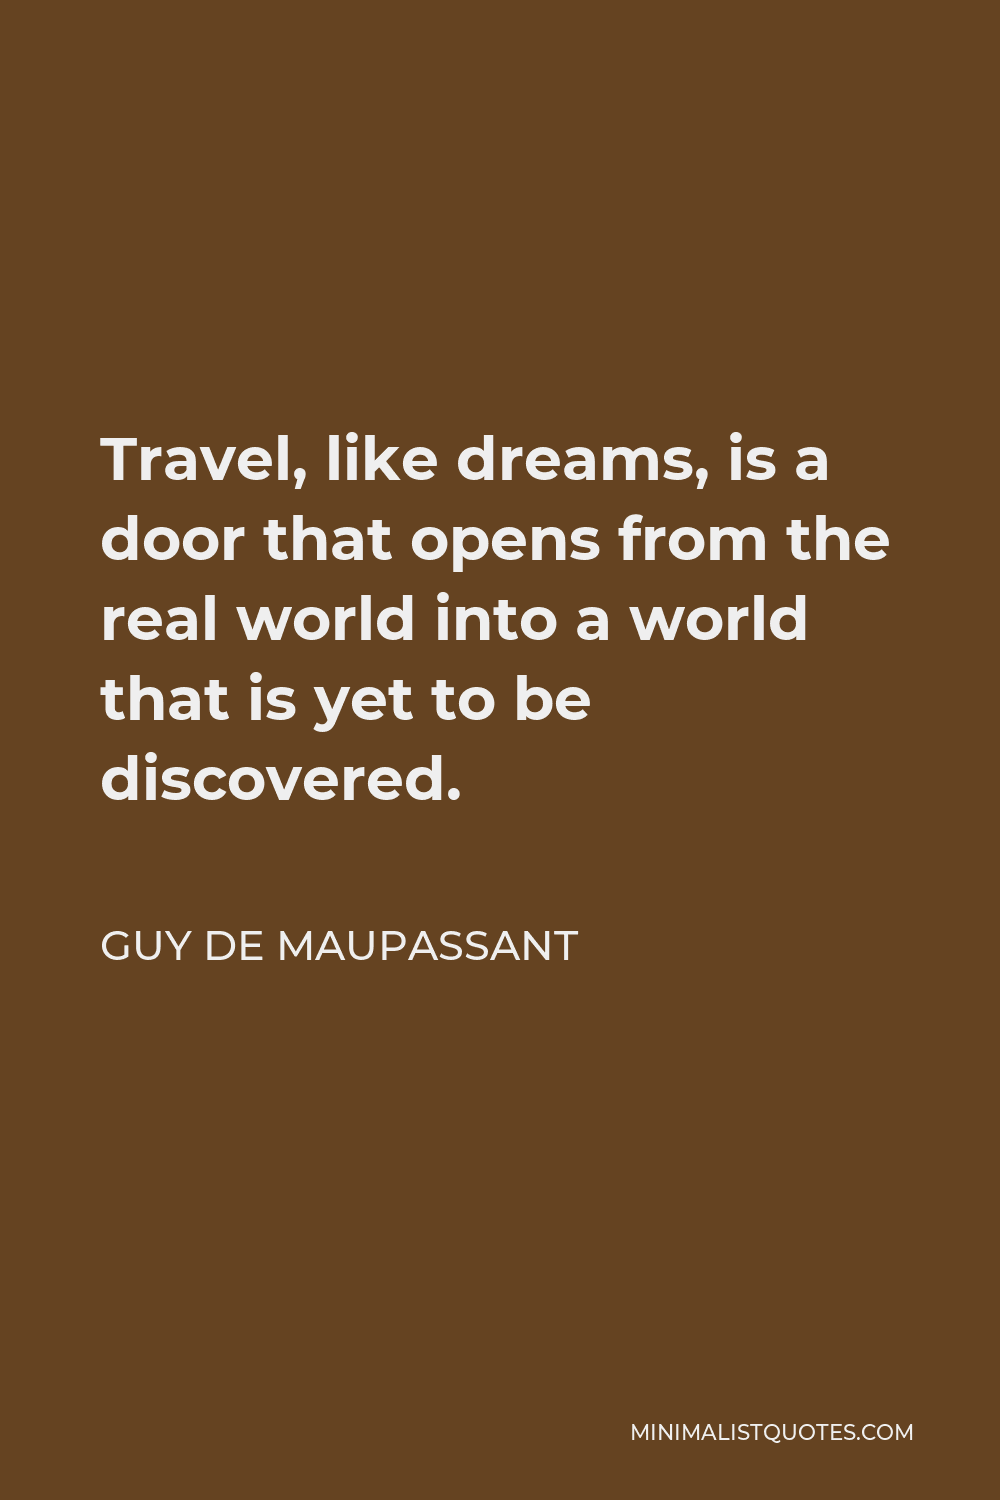 Guy de Maupassant Quote - Travel, like dreams, is a door that opens from the real world into a world that is yet to be discovered.